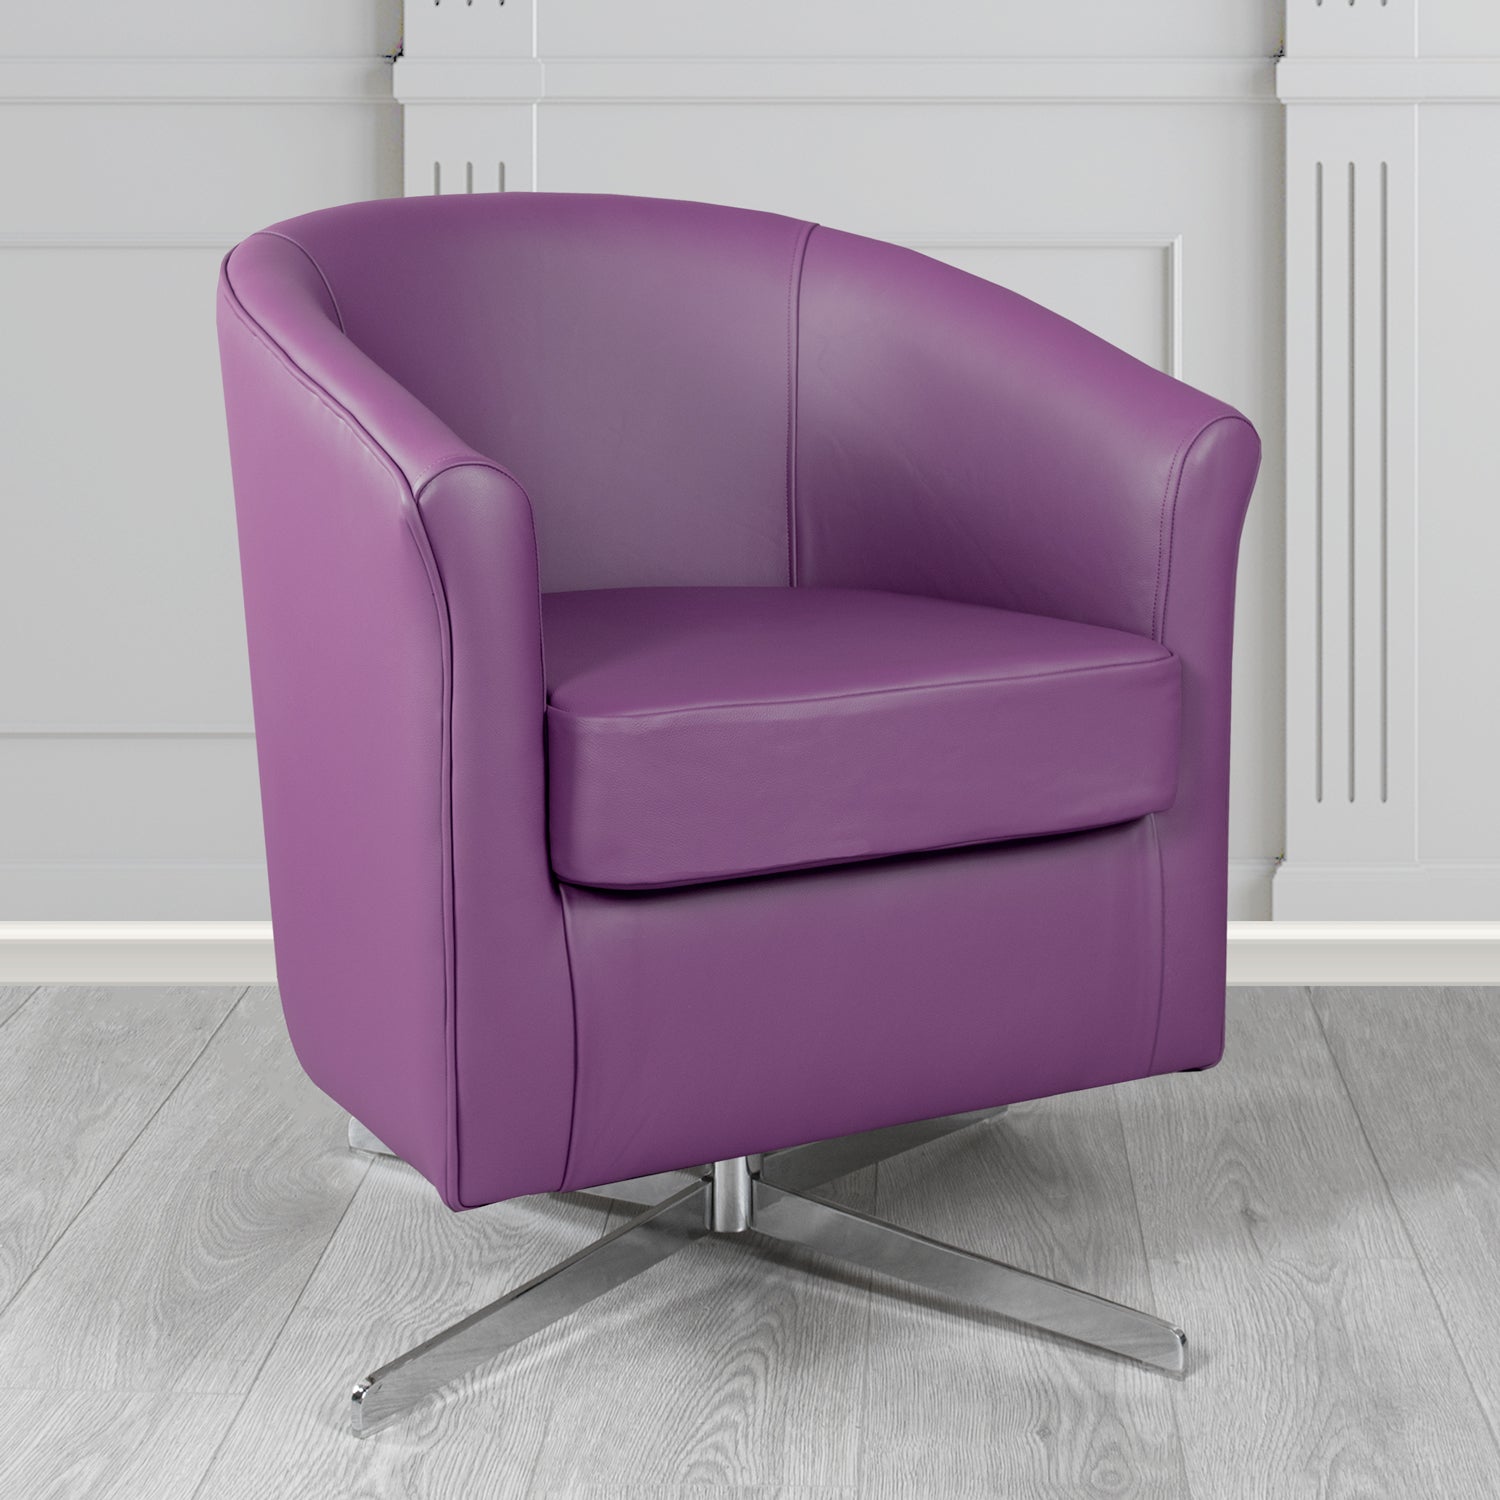 Cannes Swivel Tub Chair in Shelly Wineberry Crib 5 Genuine Leather - The Tub Chair Shop